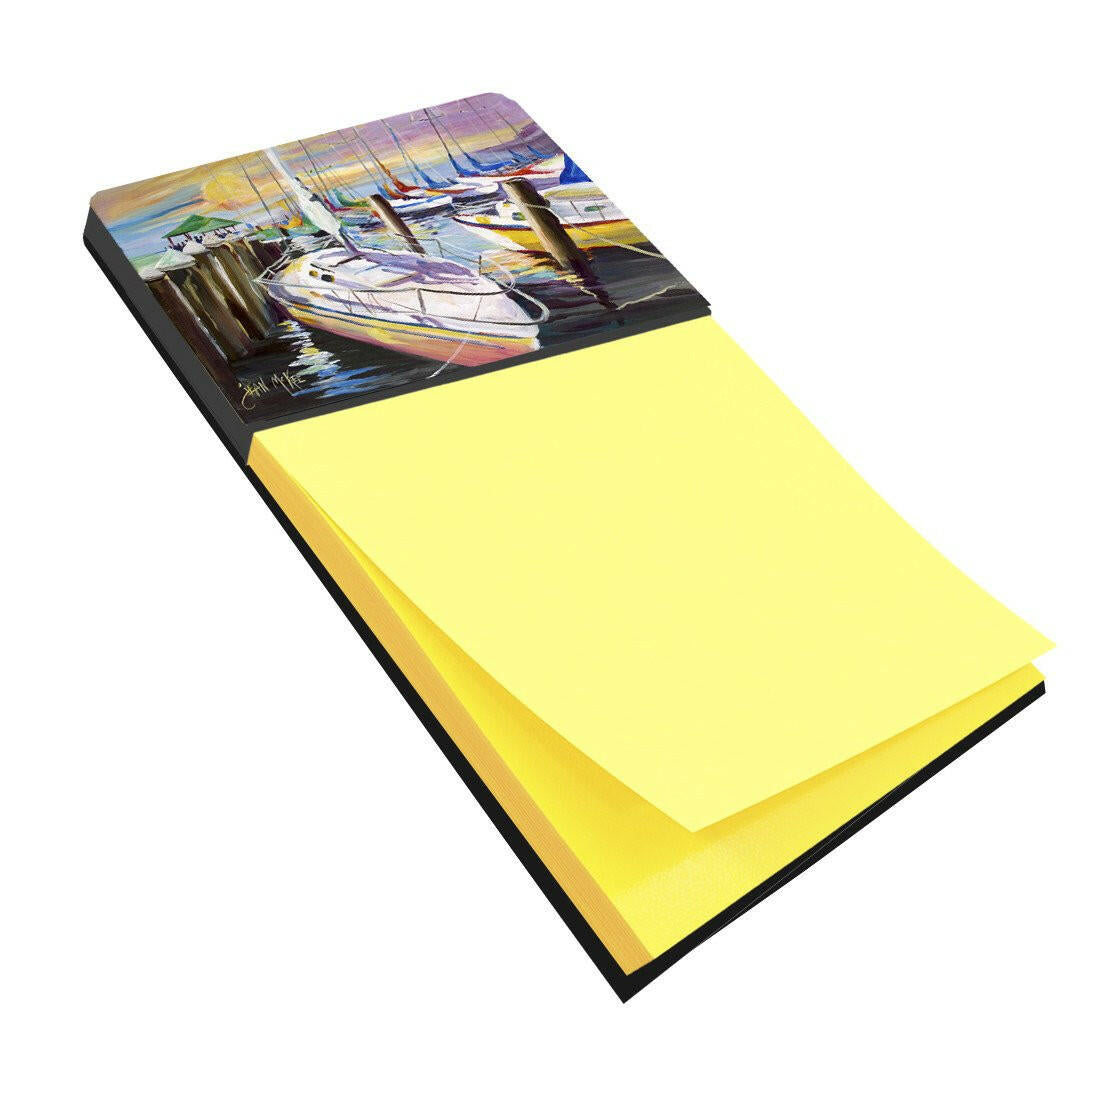 Sailboats at the Fairhope Yacht Club Docks Sticky Note Holder JMK1044SN by Caroline's Treasures